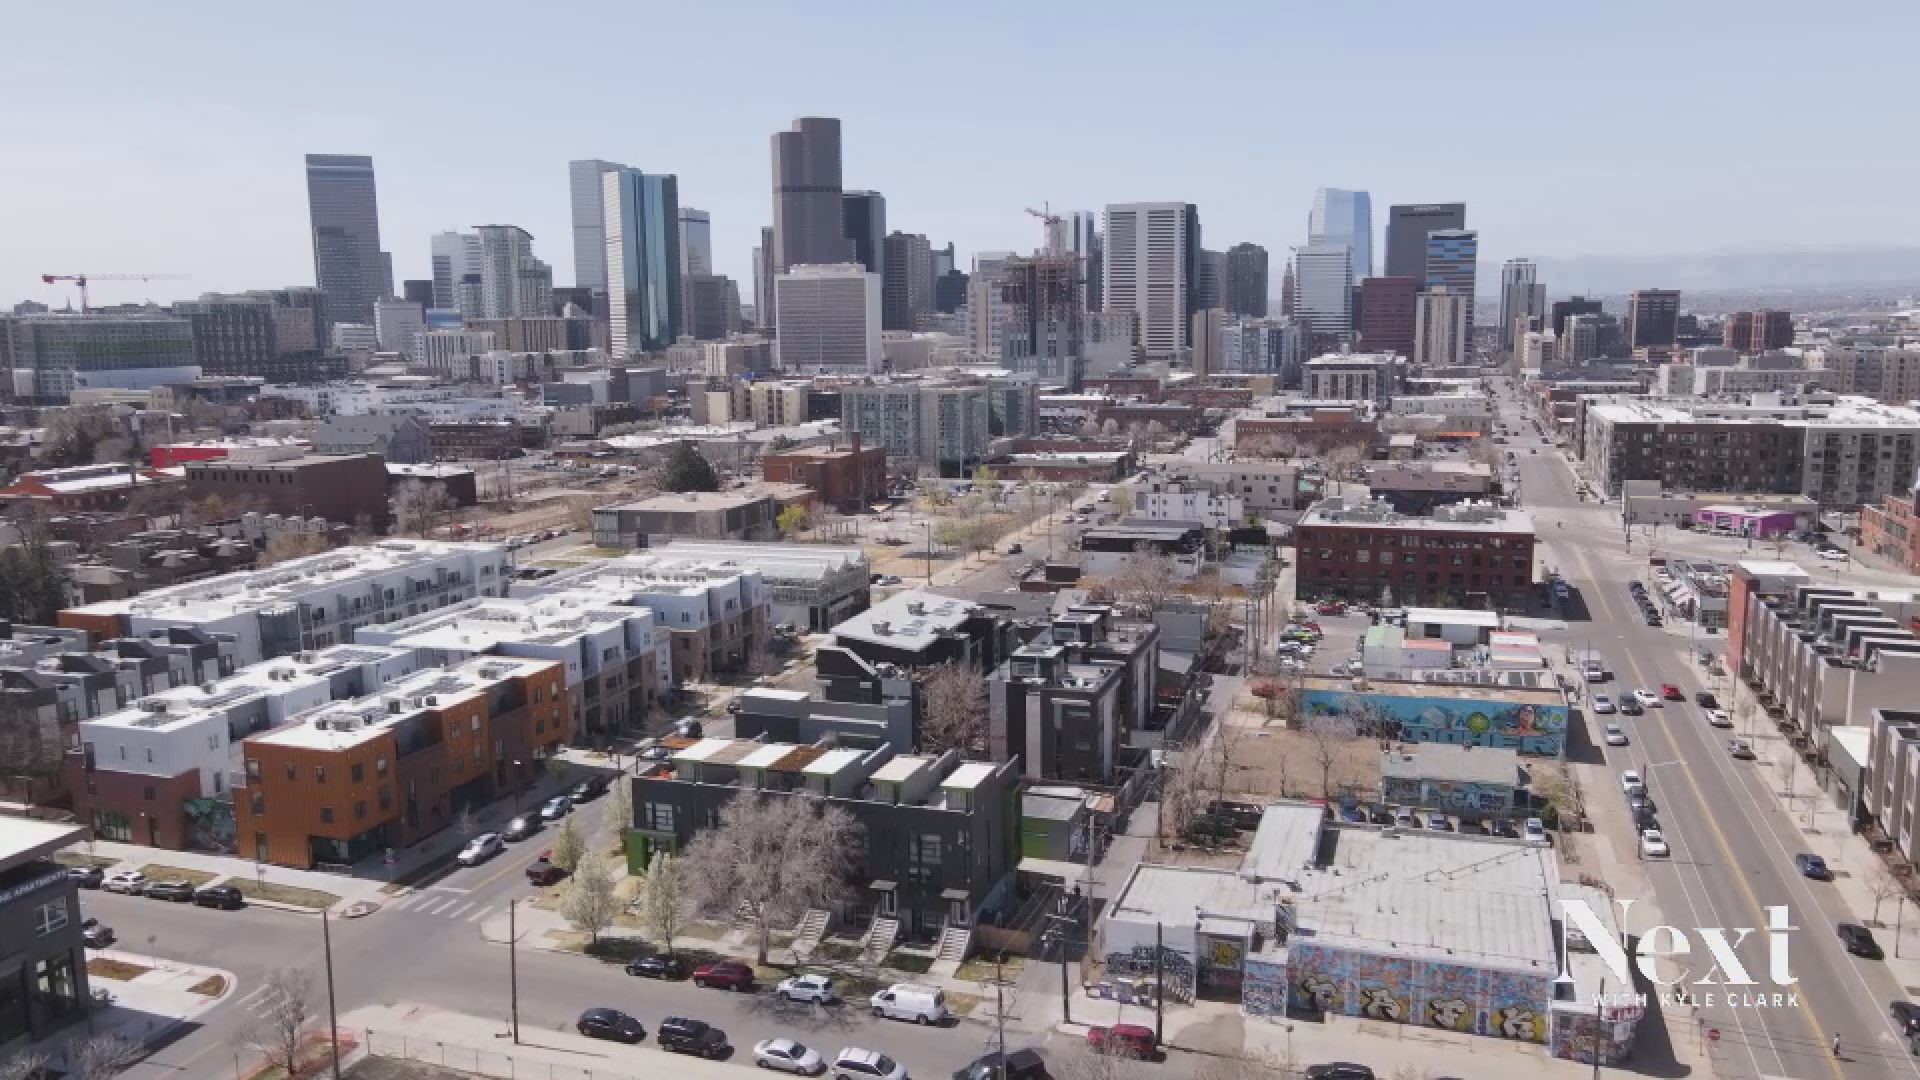 Kourtney Garrett, new executive director of the Downtown Denver Partnership, said she is working with her team to attract businesses from other parts of the country.